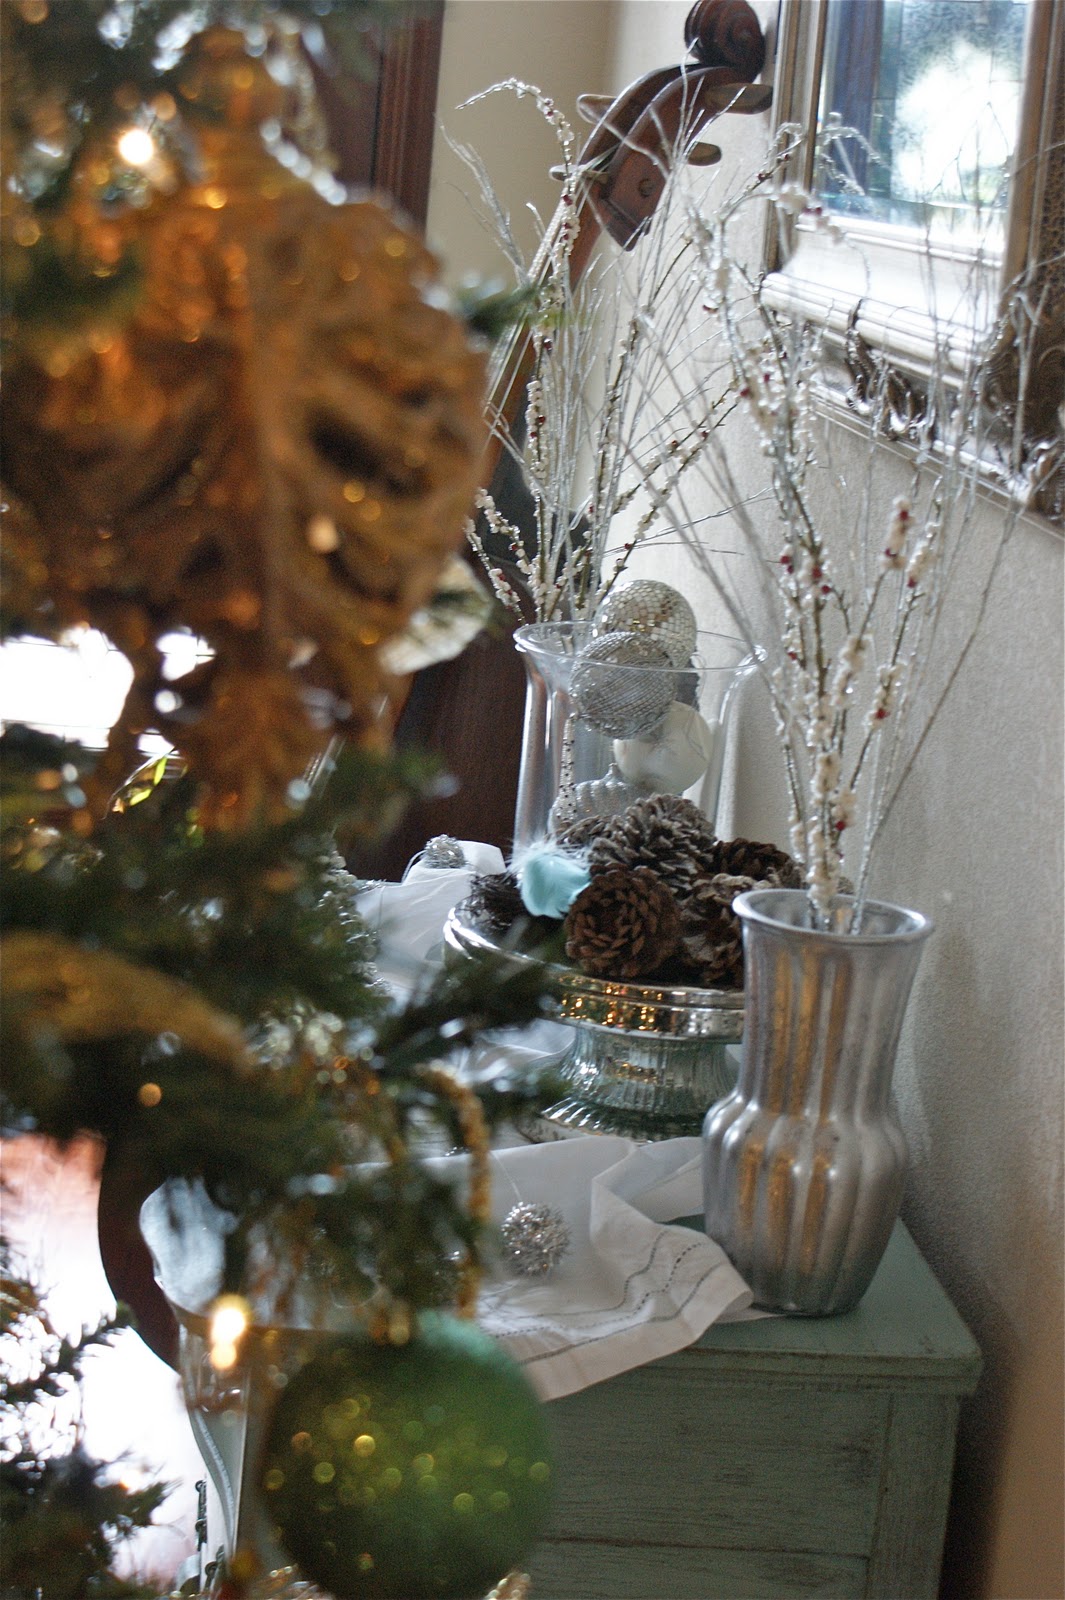 A Brown Christmas – Perfectly Imperfect Designz